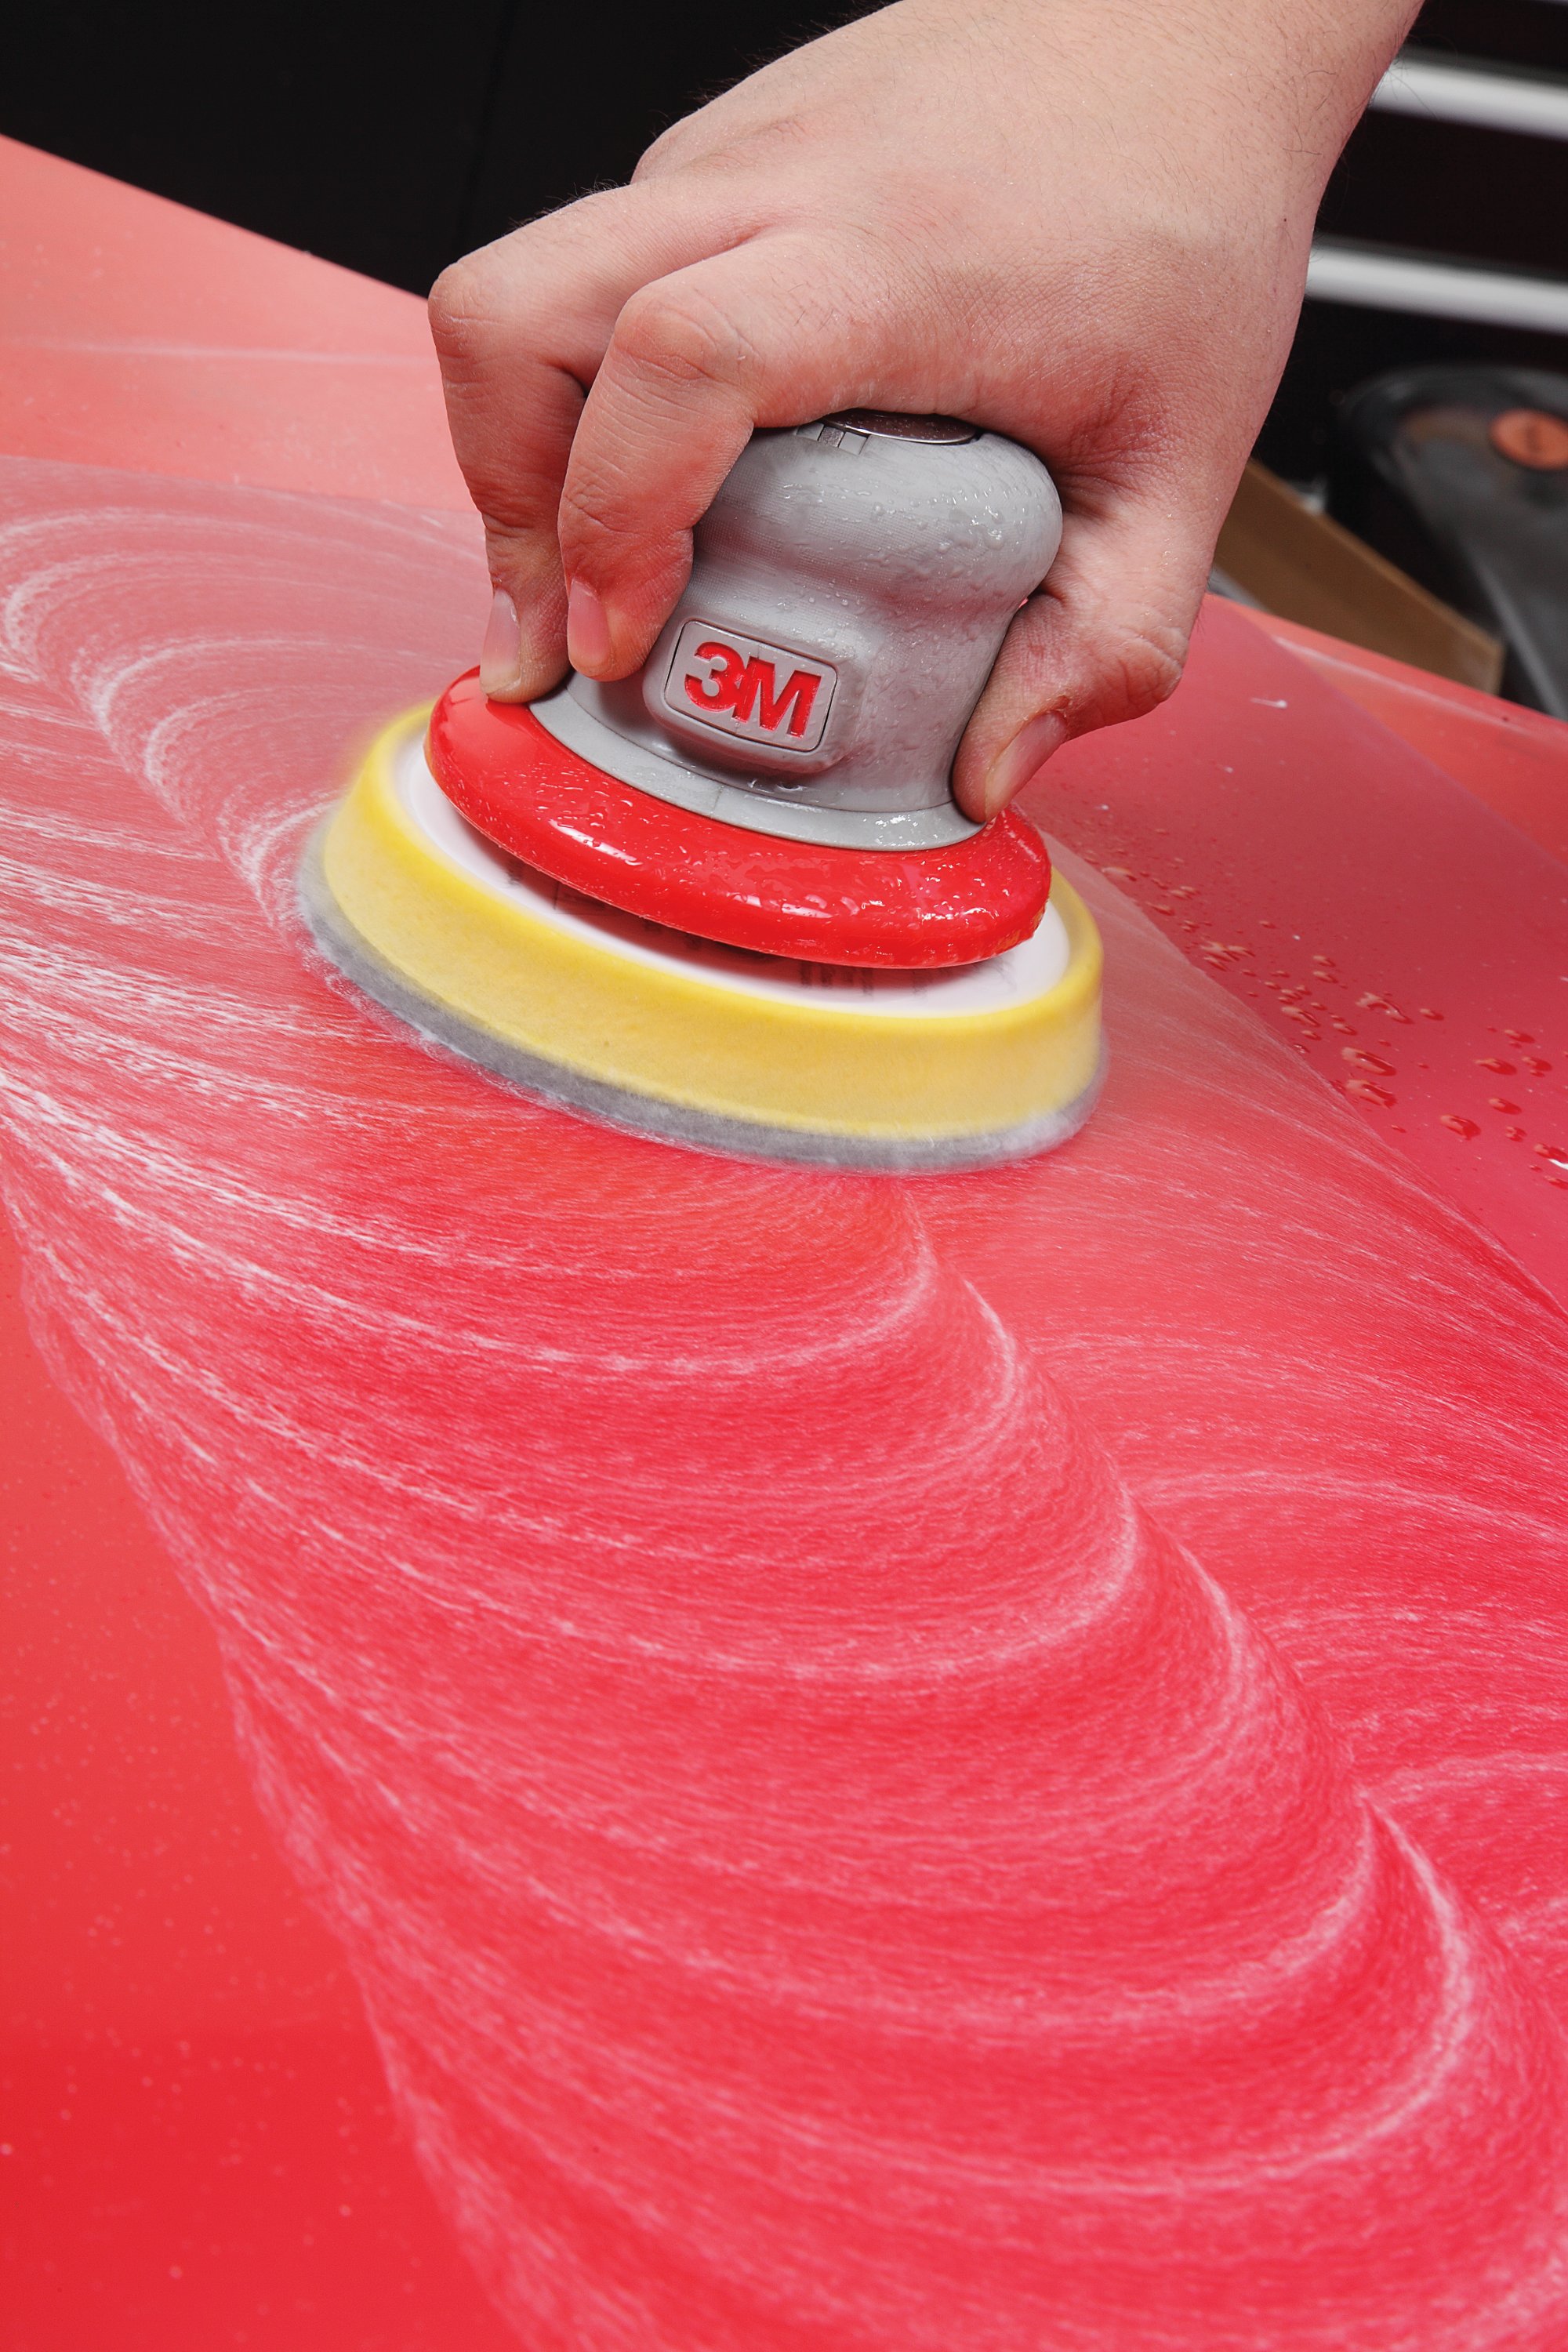 We designed our 3M™ Finesse-it™ Microfinishing Film Disc Roll 268L to help you achieve precise, controlled, close-tolerance finishes and remove imperfections on multiple surfaces.